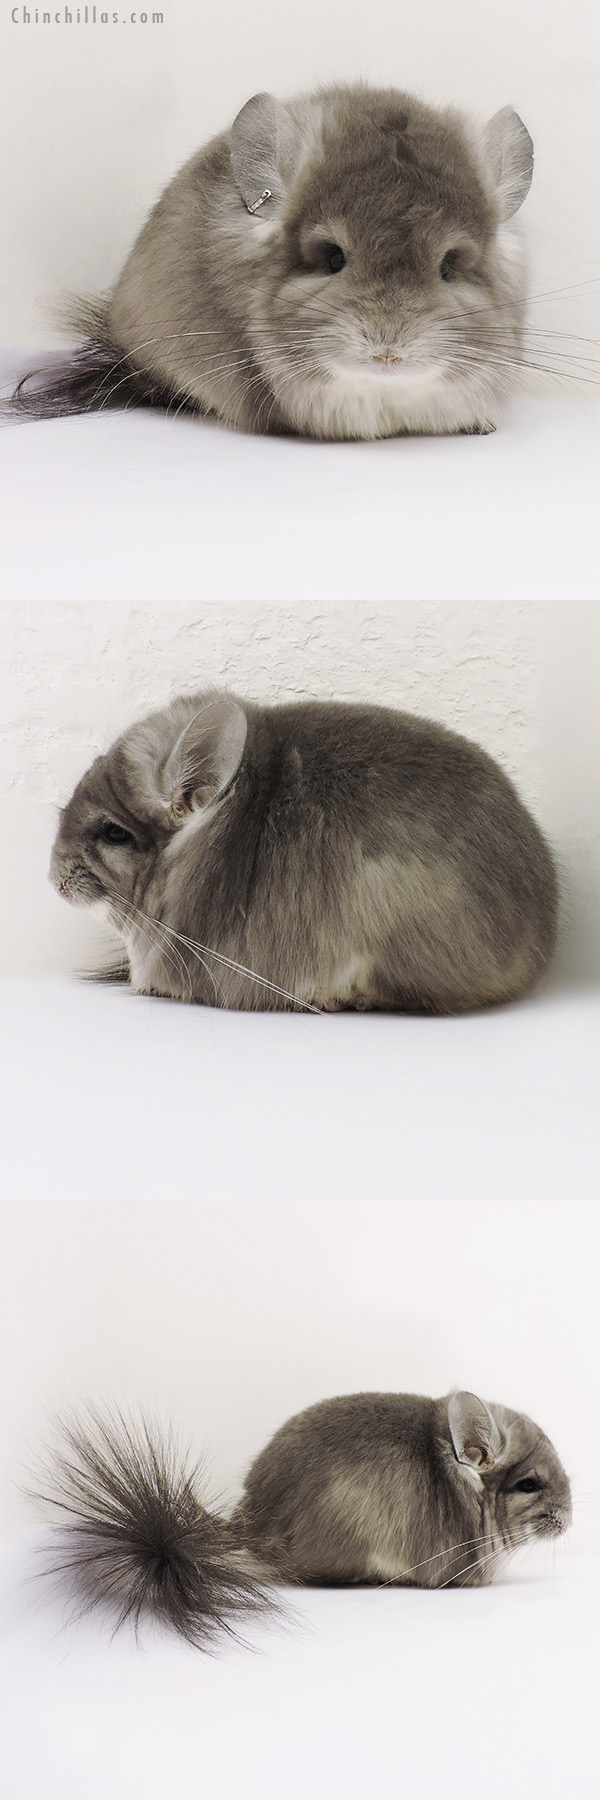 Chinchilla or related item offered for sale or export on Chinchillas.com - 16148 Exceptional Violet  Royal Persian Angora Male Chinchilla